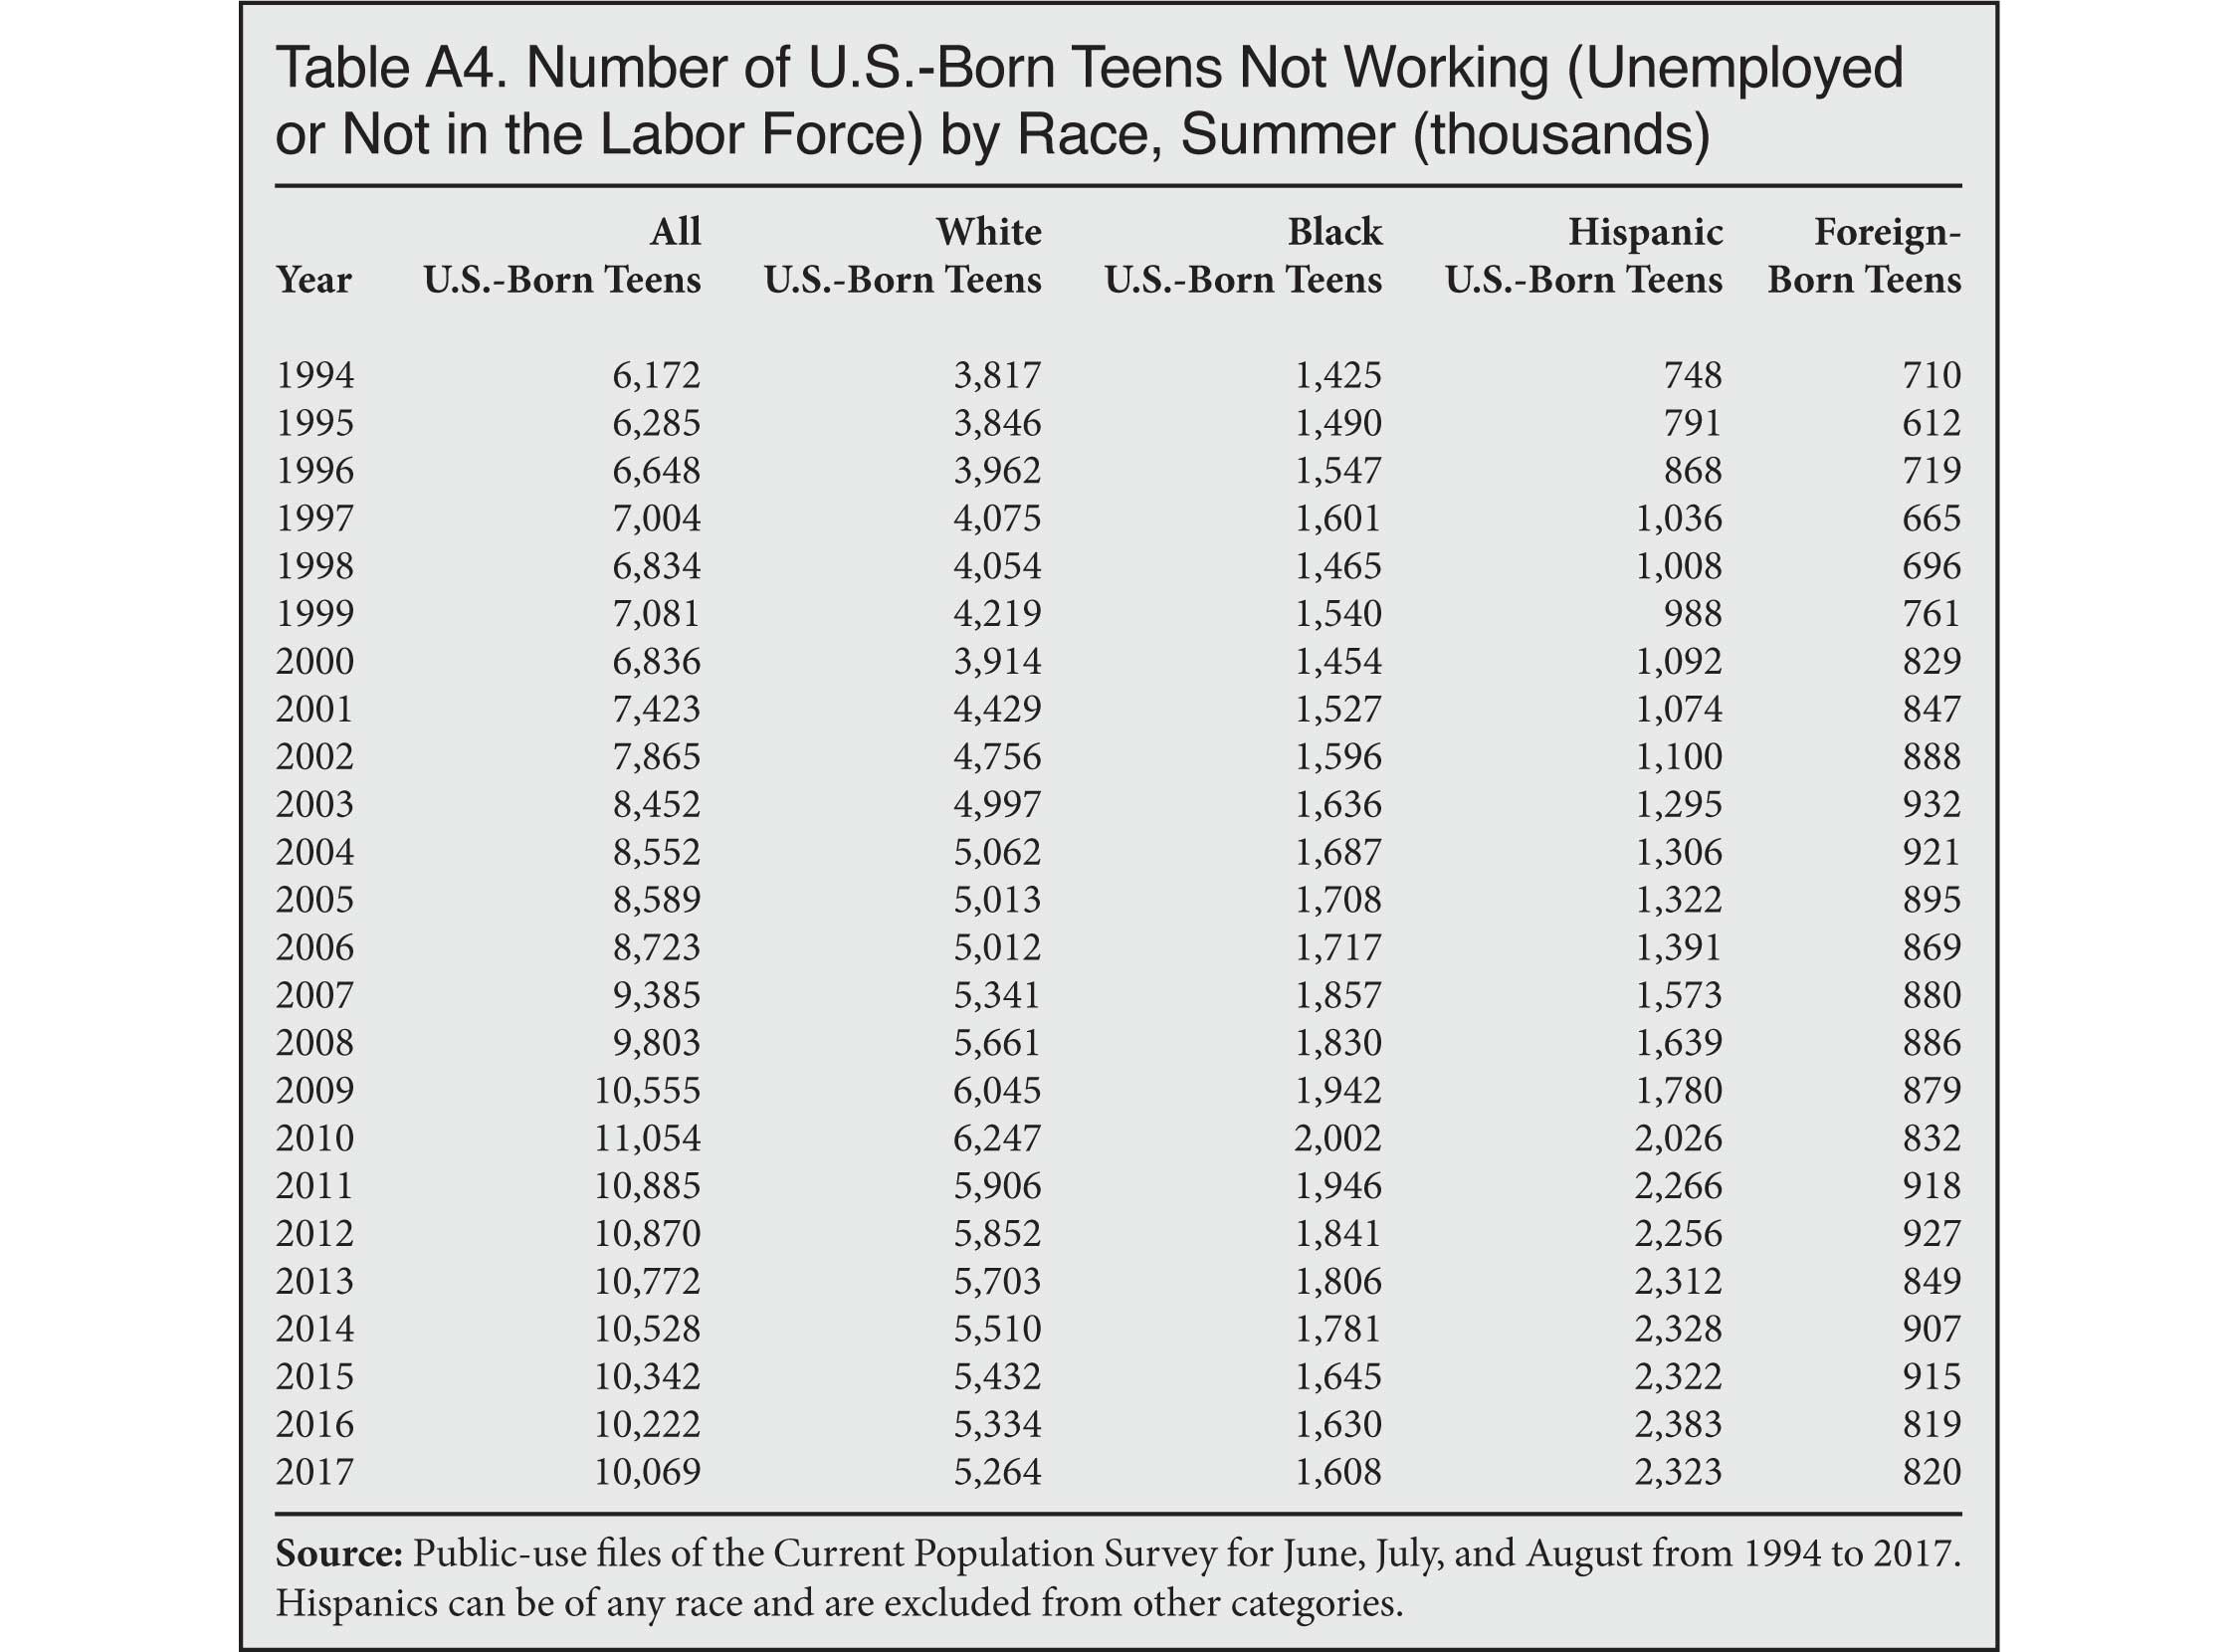 Table: Number of US Born Teens Not Working (Unemployed or not in the Labor Force) by Race, Summer